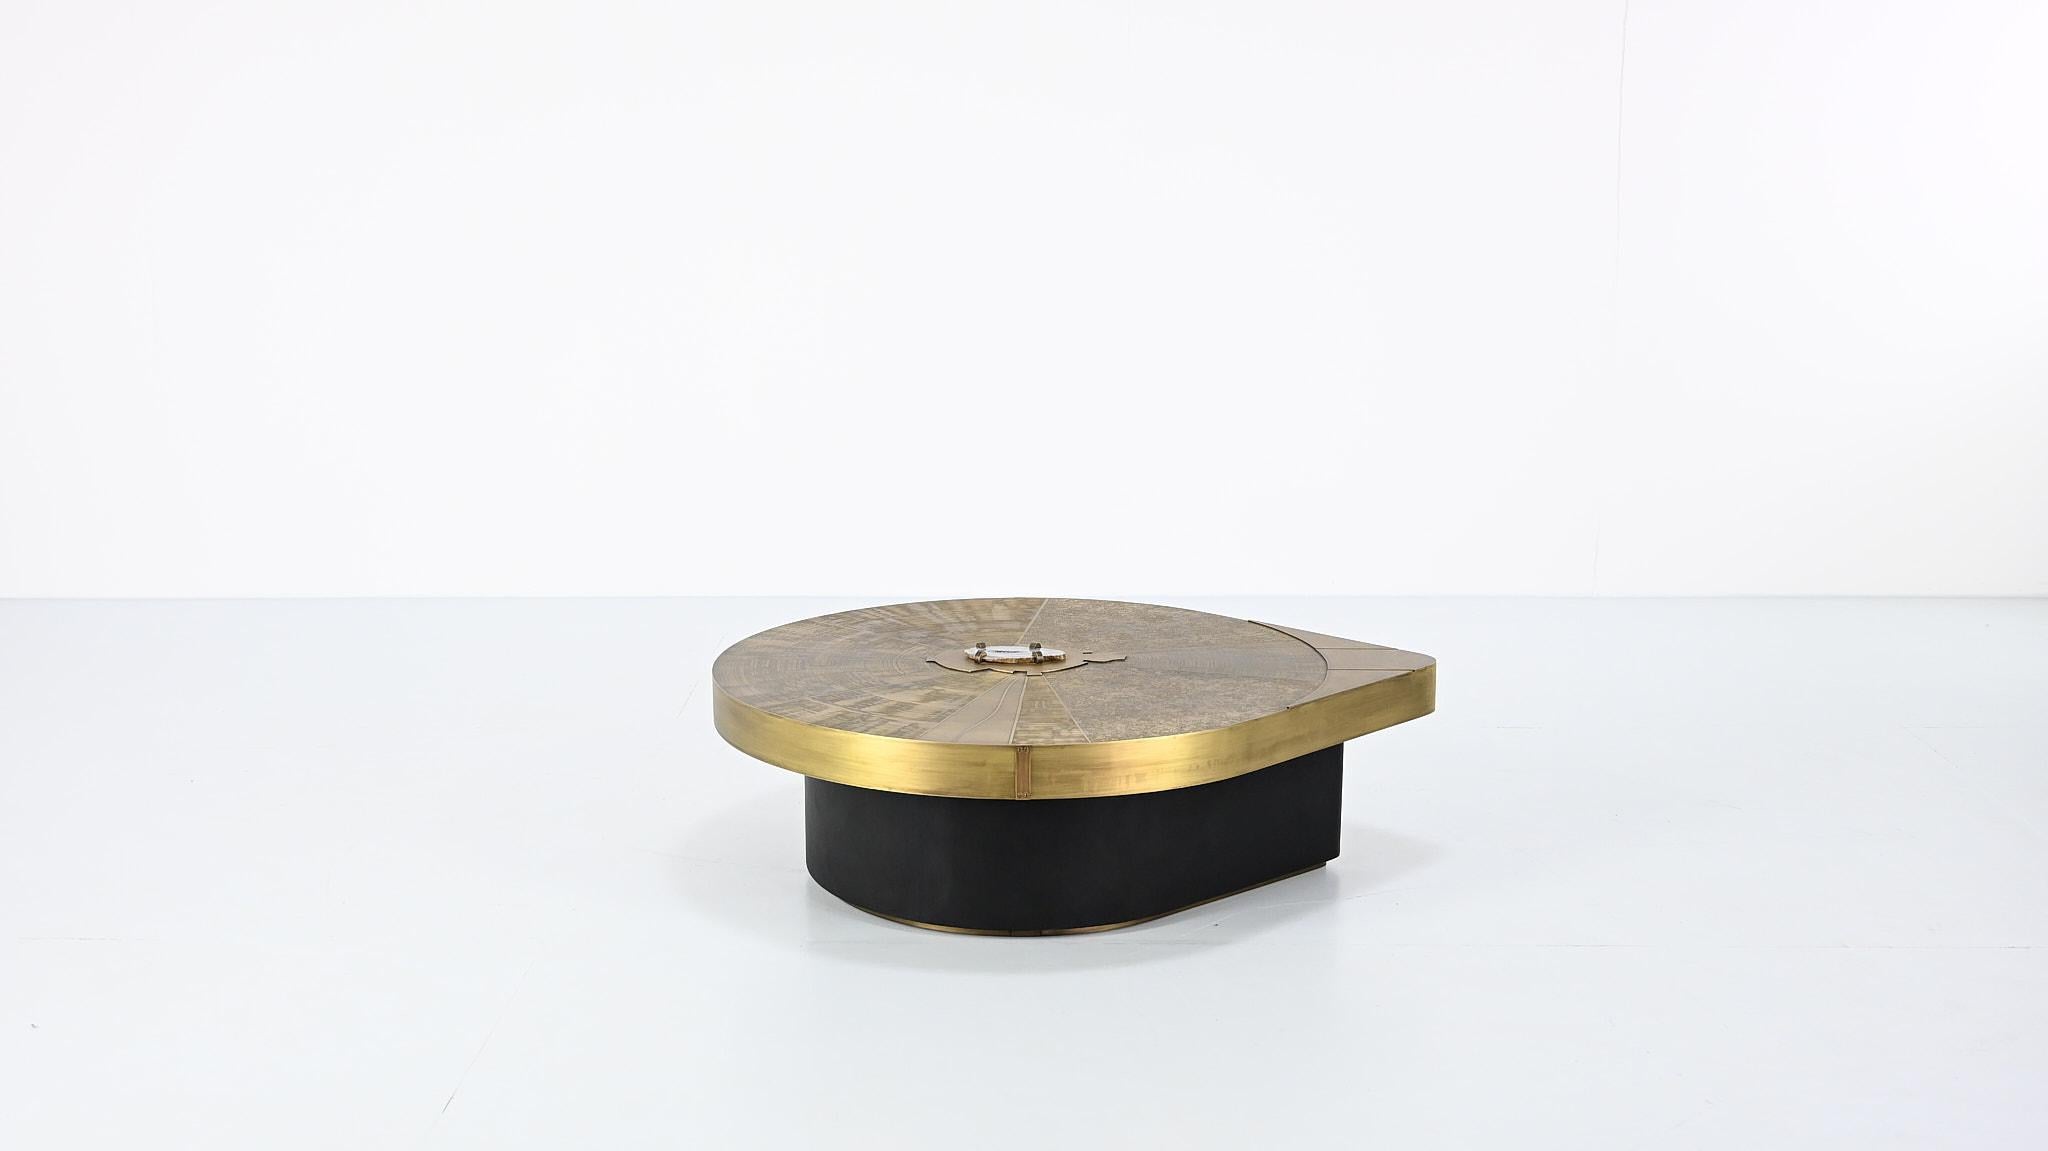 Belgian Freeform acid etched brass and agate stone coffee table